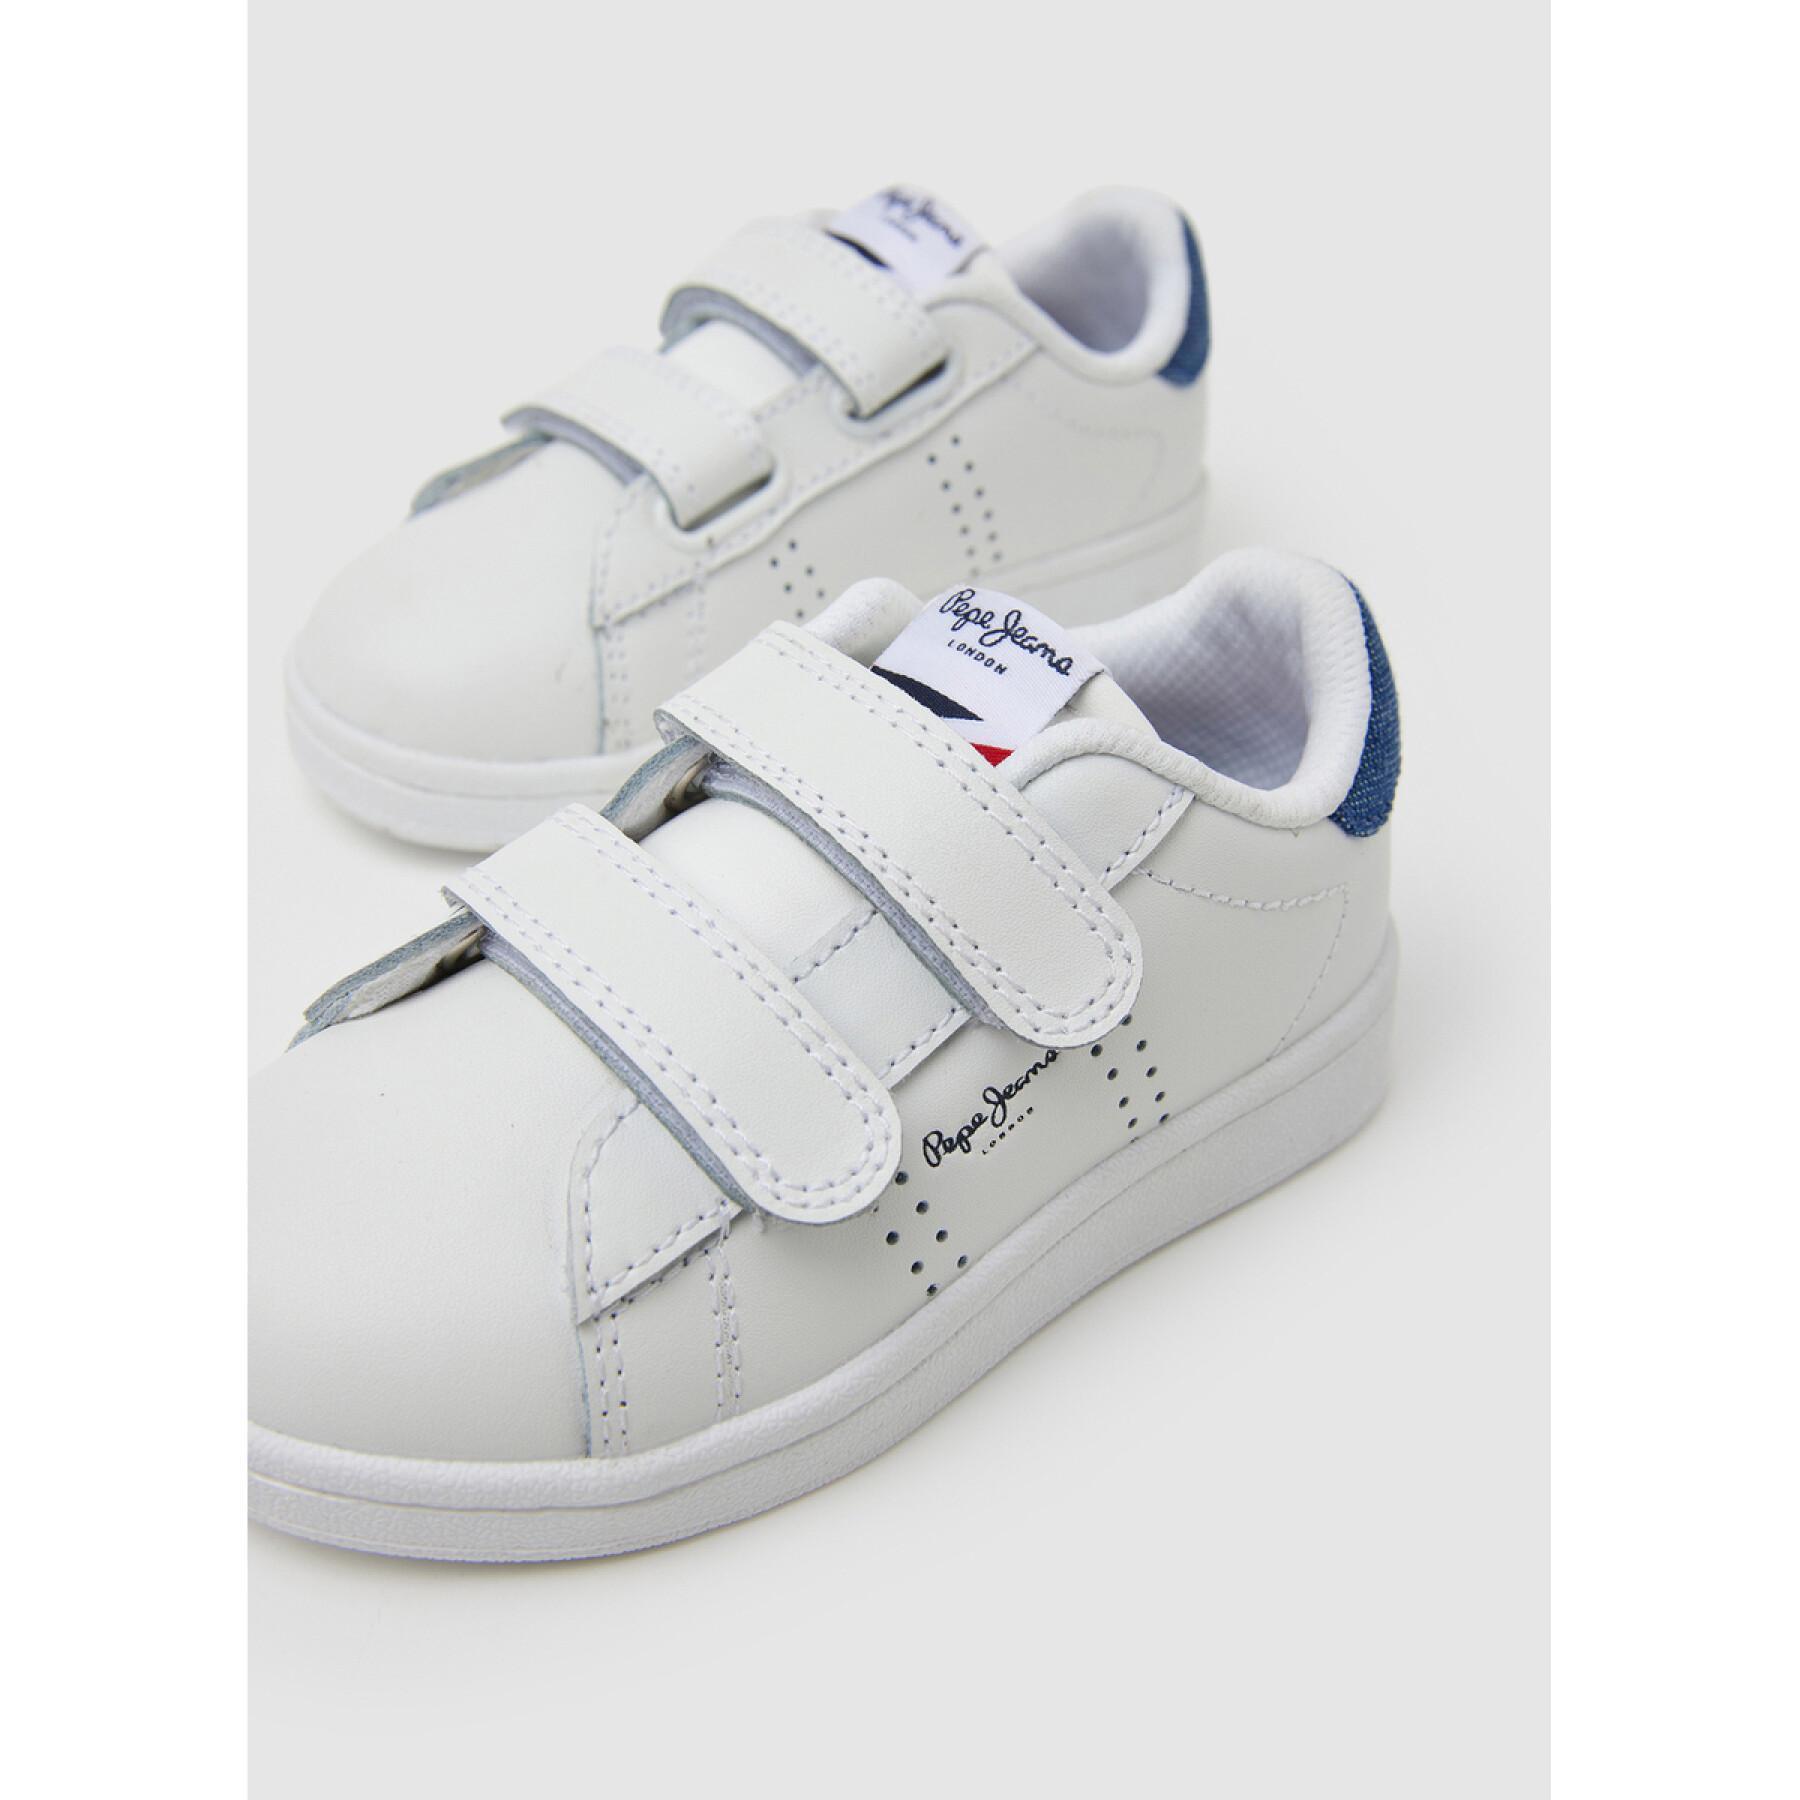 Children's sneakers Pepe Jeans Player Basic Bk